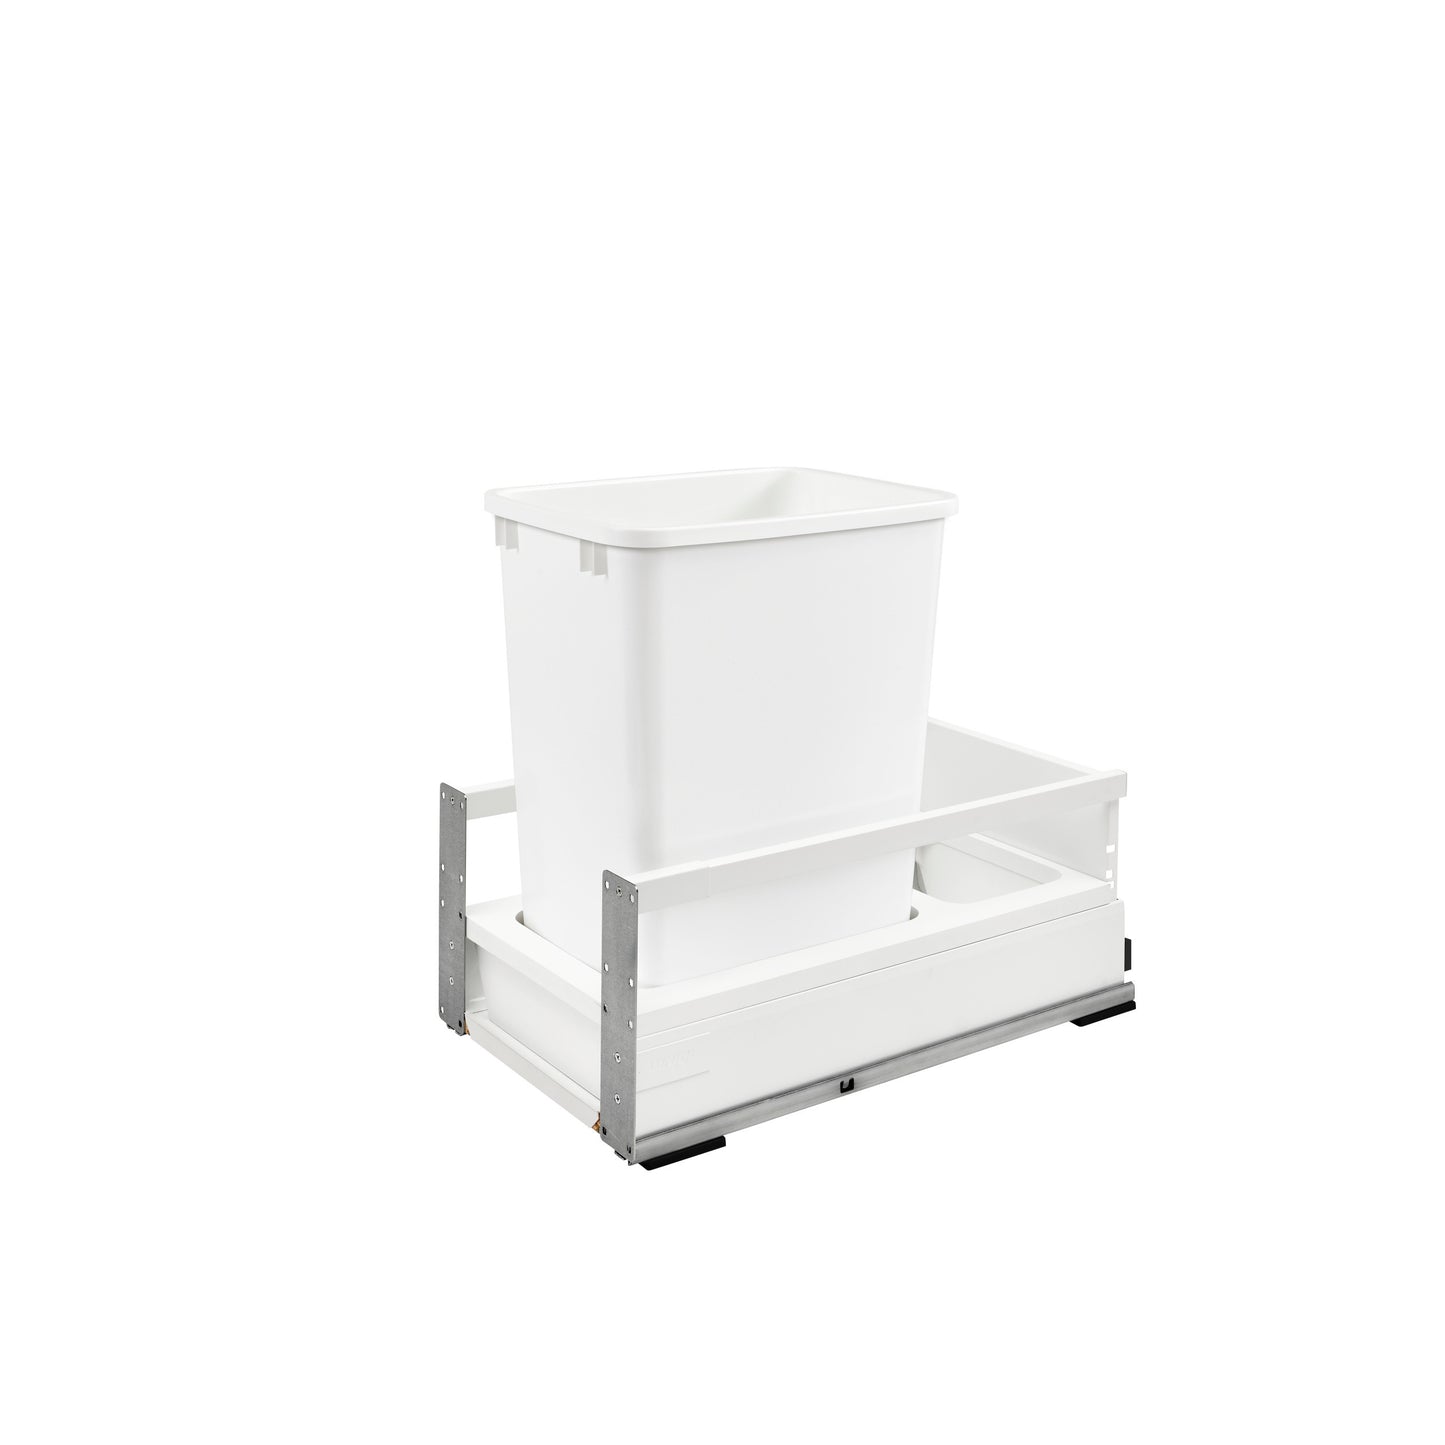 Rev-A-Shelf / TWCSD-15DM-1 / Tandem Pullout Waste/Trash Container w/ Soft-Close and SERVO-DRIVE System